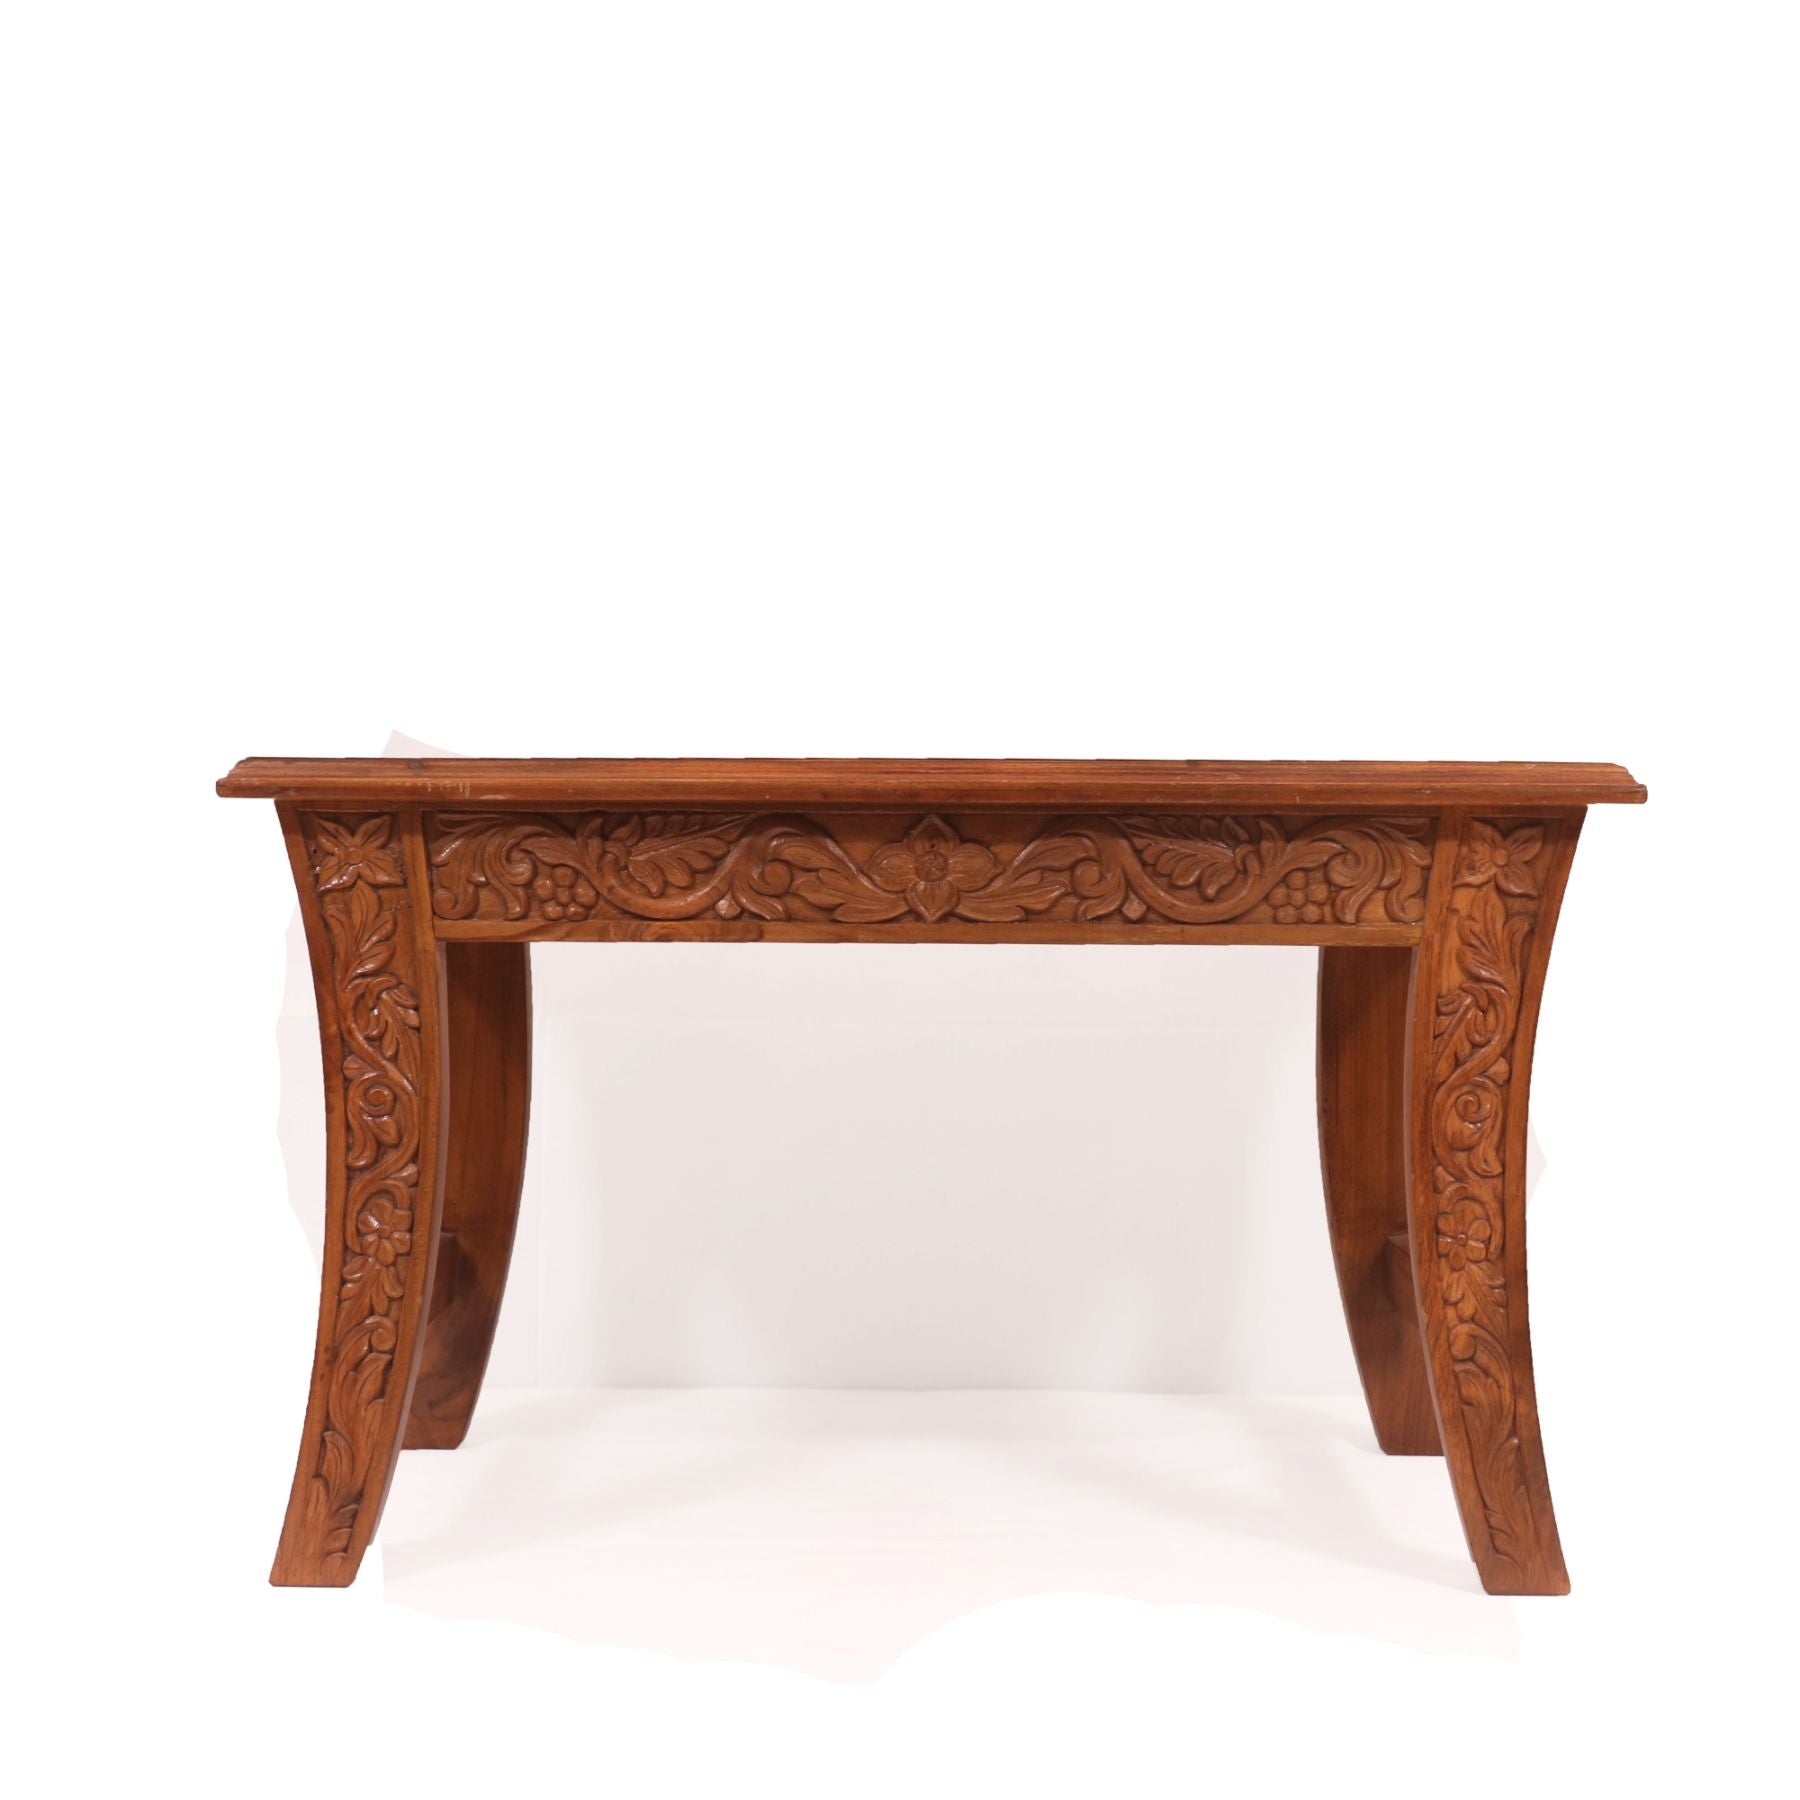 Carving Border Coffee Table Coffee Table